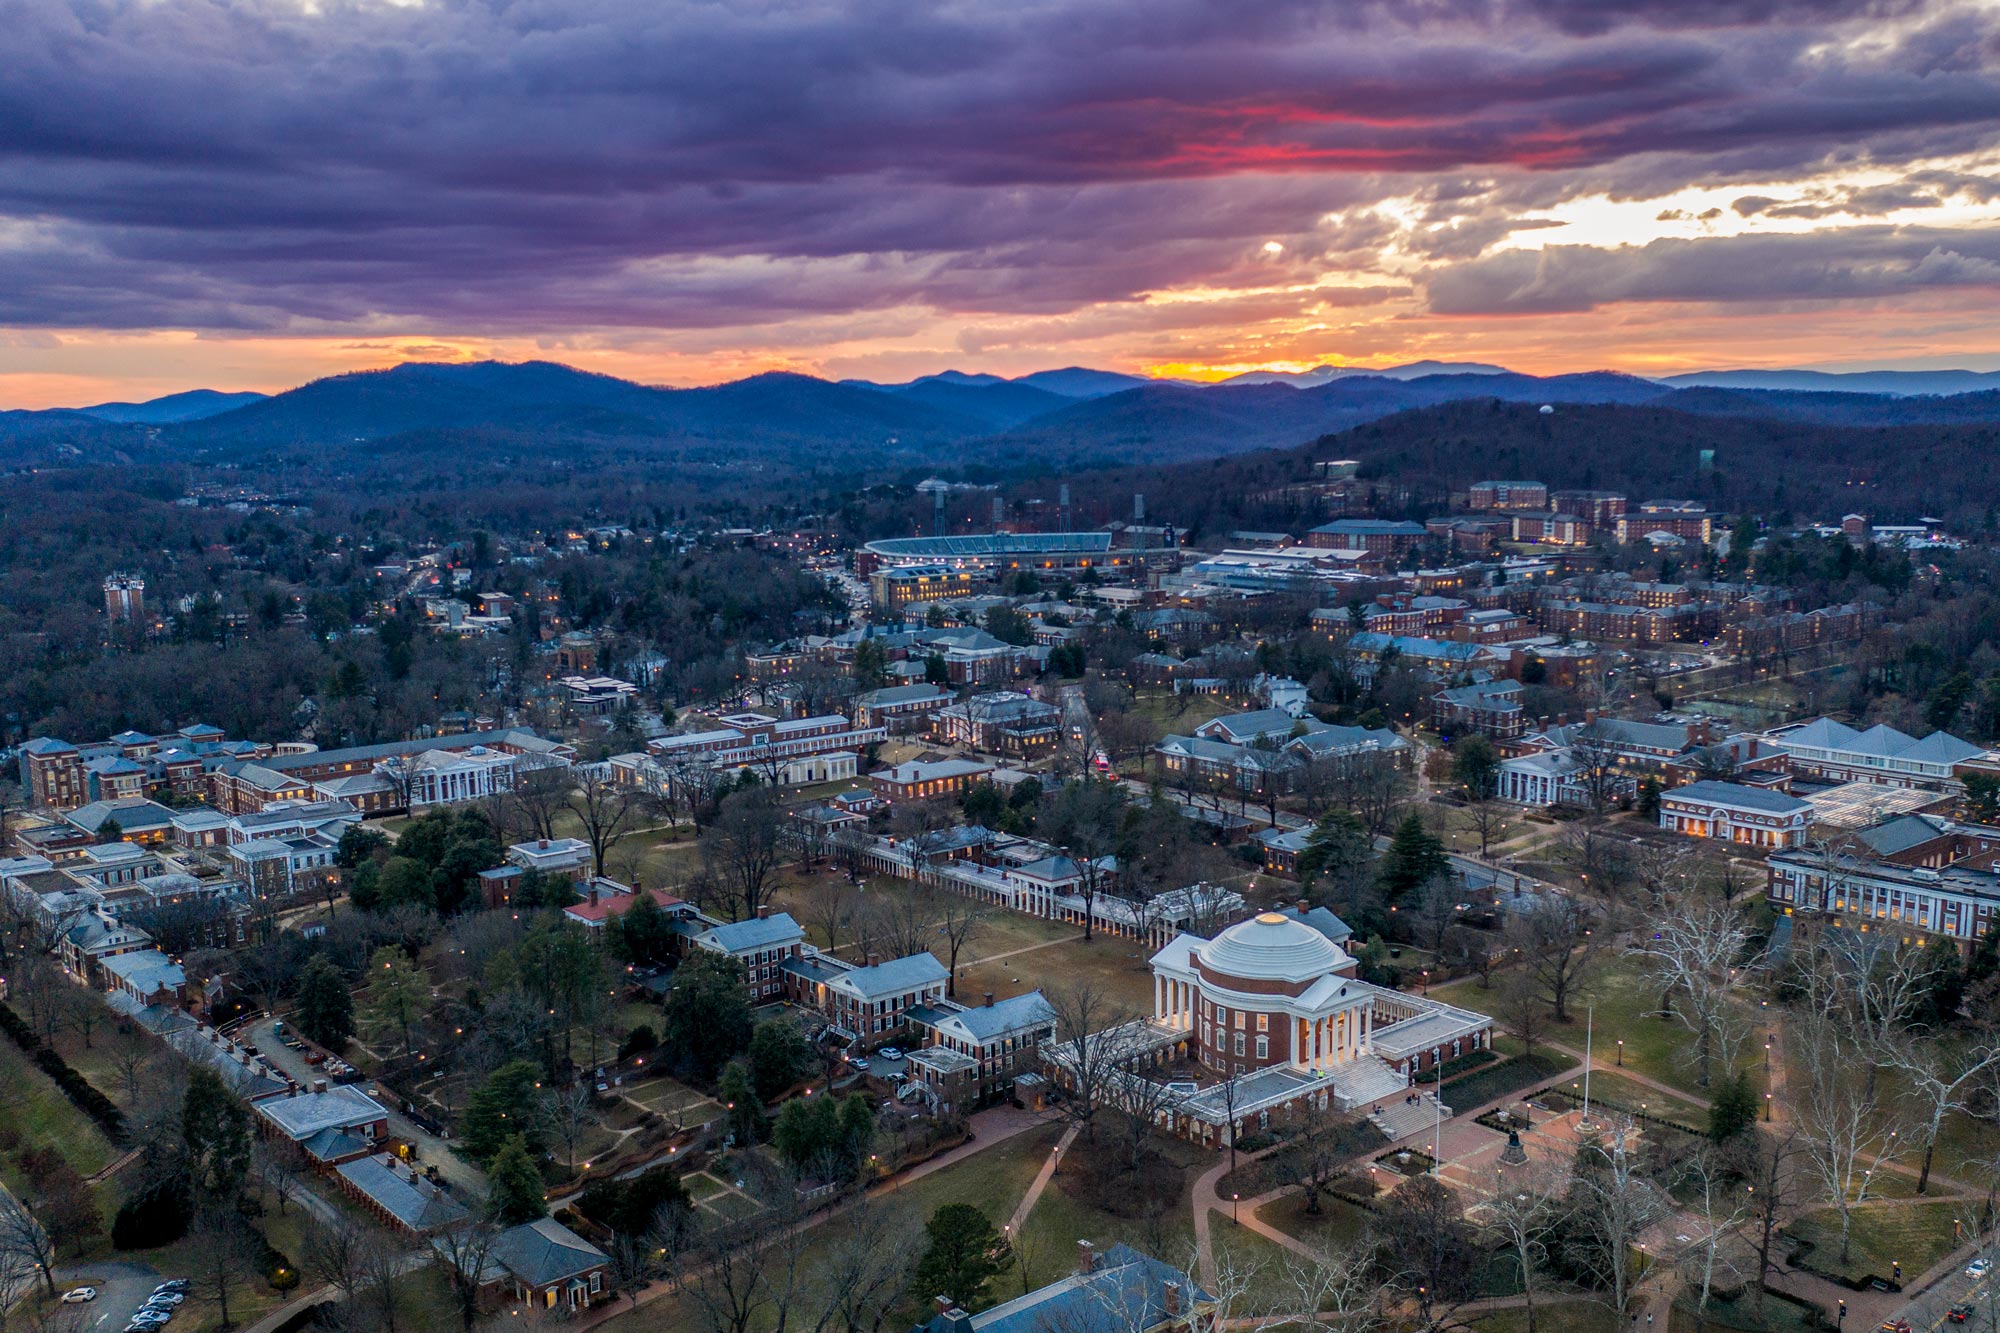 Arial view of the Rotunda at sunset with the sky, grey, purple, red, orange, yellow, and pink with the Blue ridge mountains in the distance